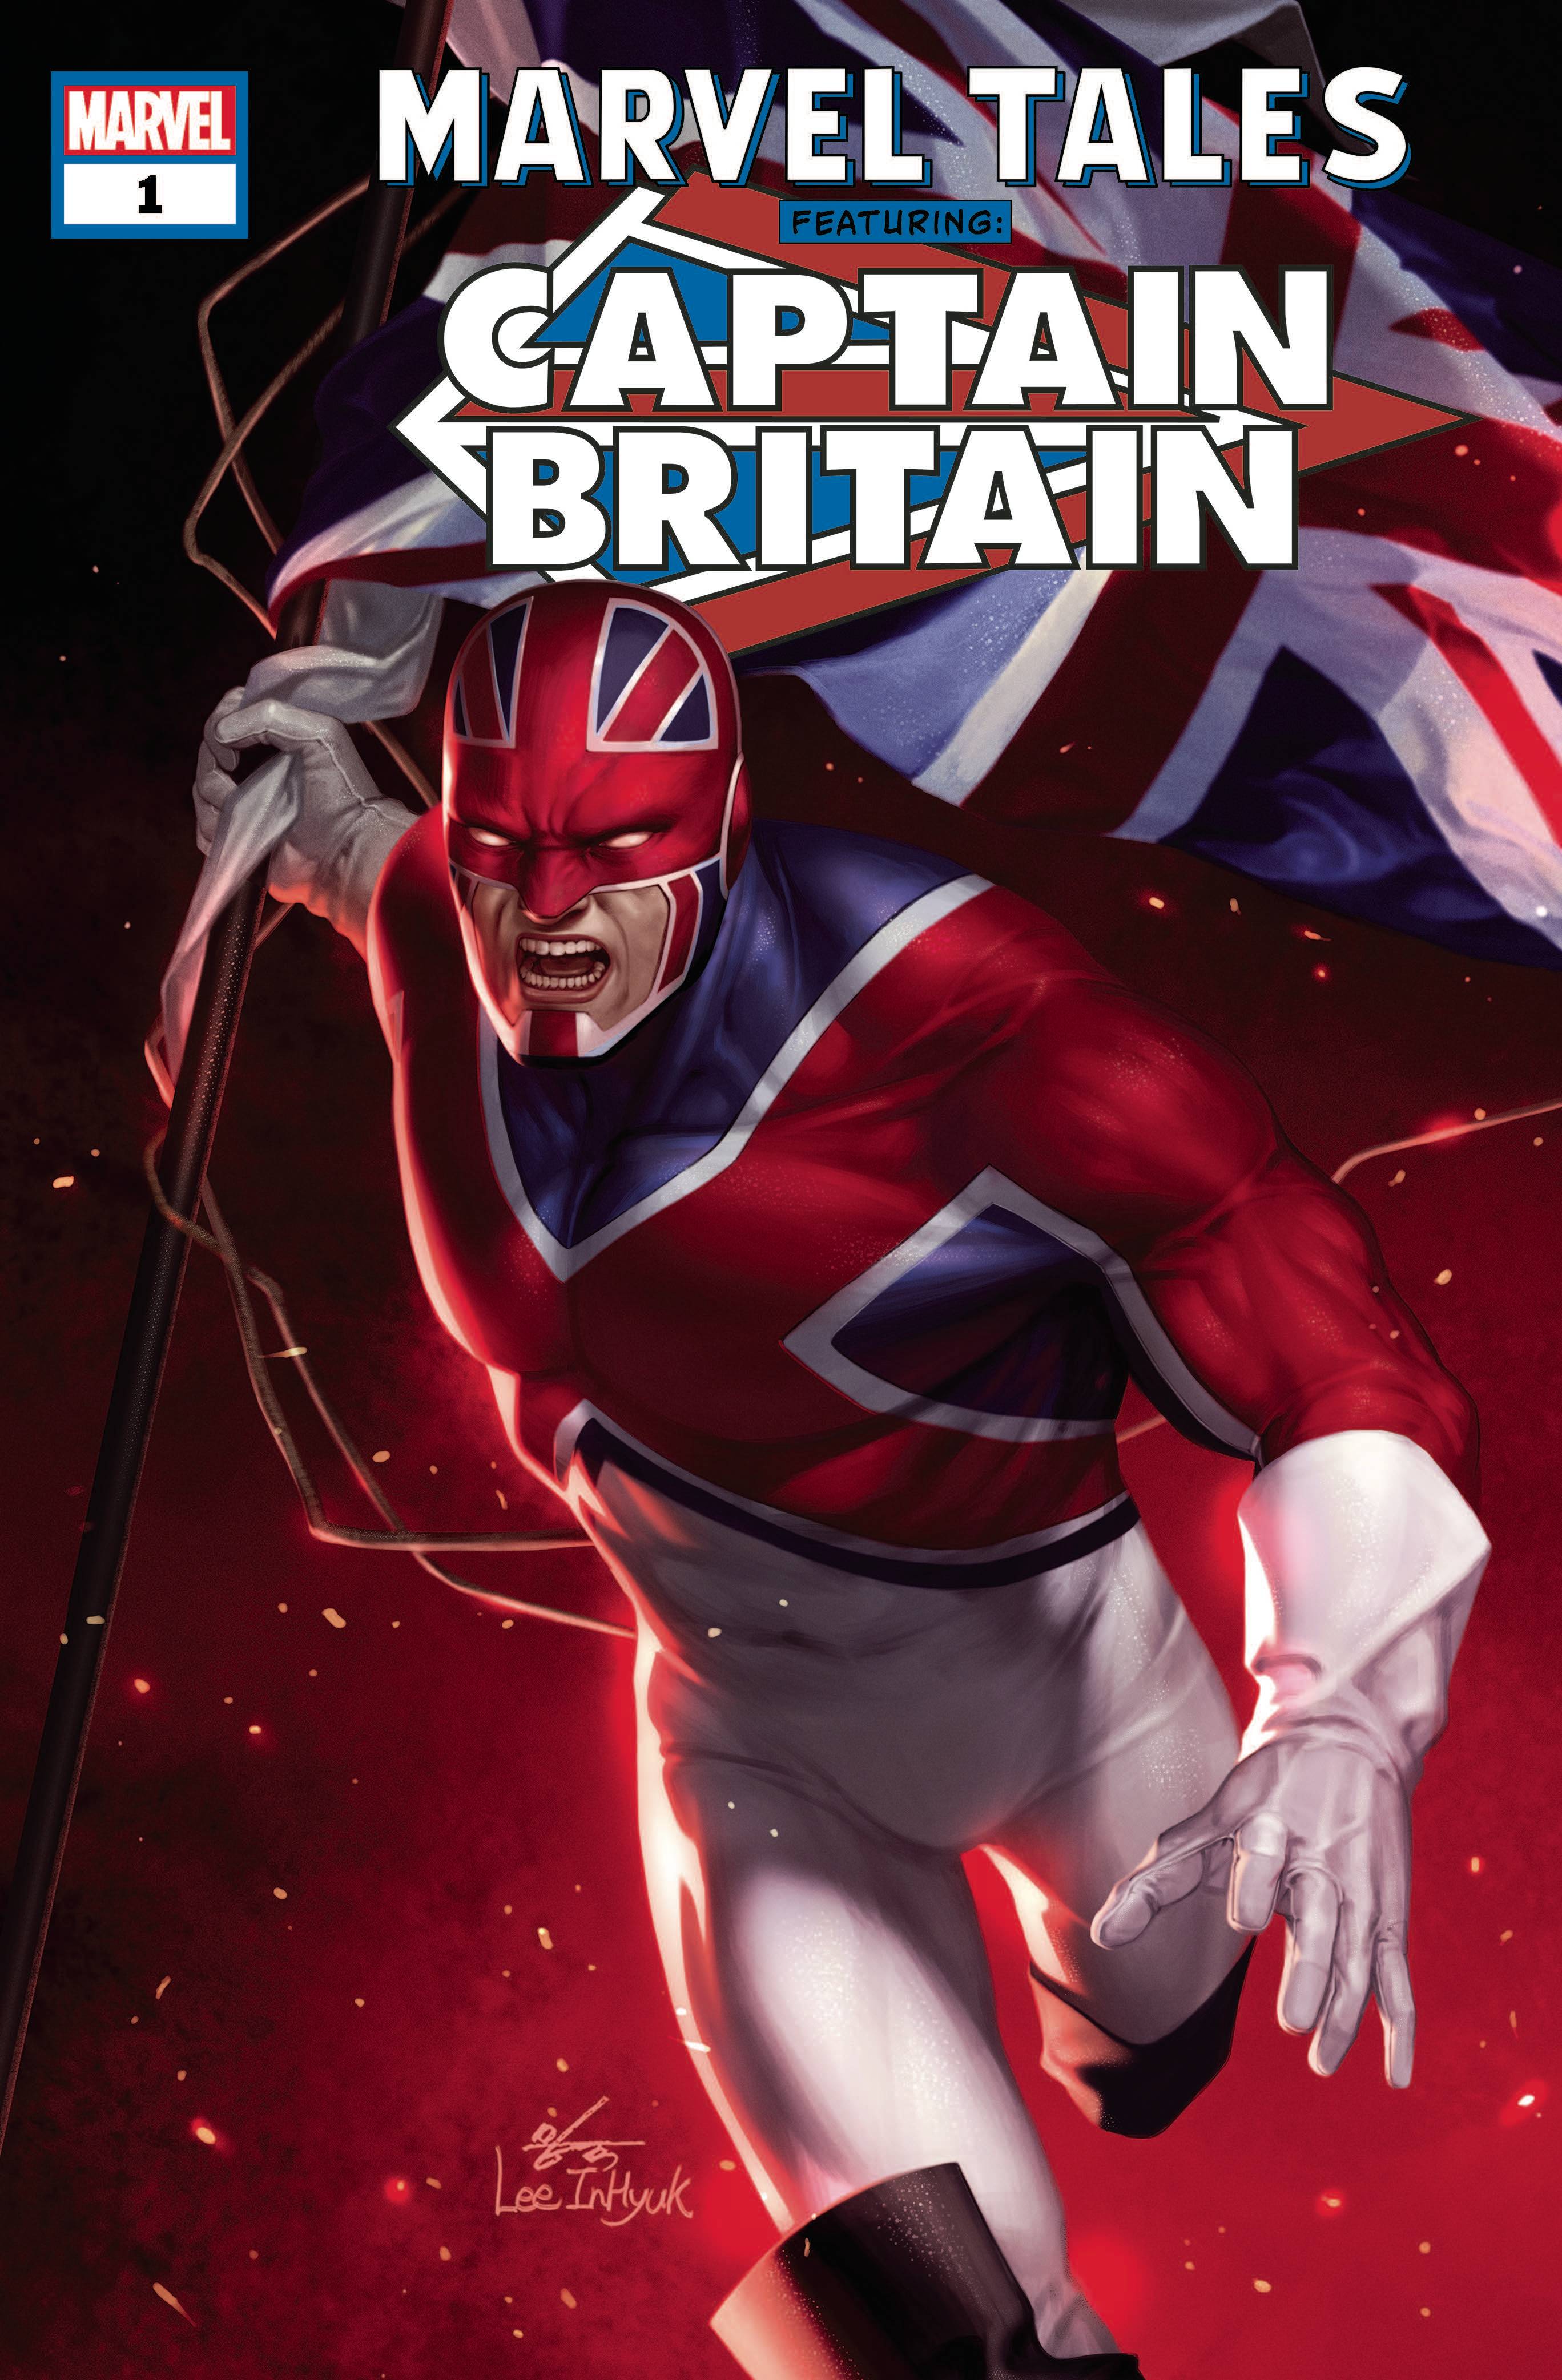 Photo of Marvel Tales Captain Britain Iss 1 - NM comic sold by Stronghold Collectibles